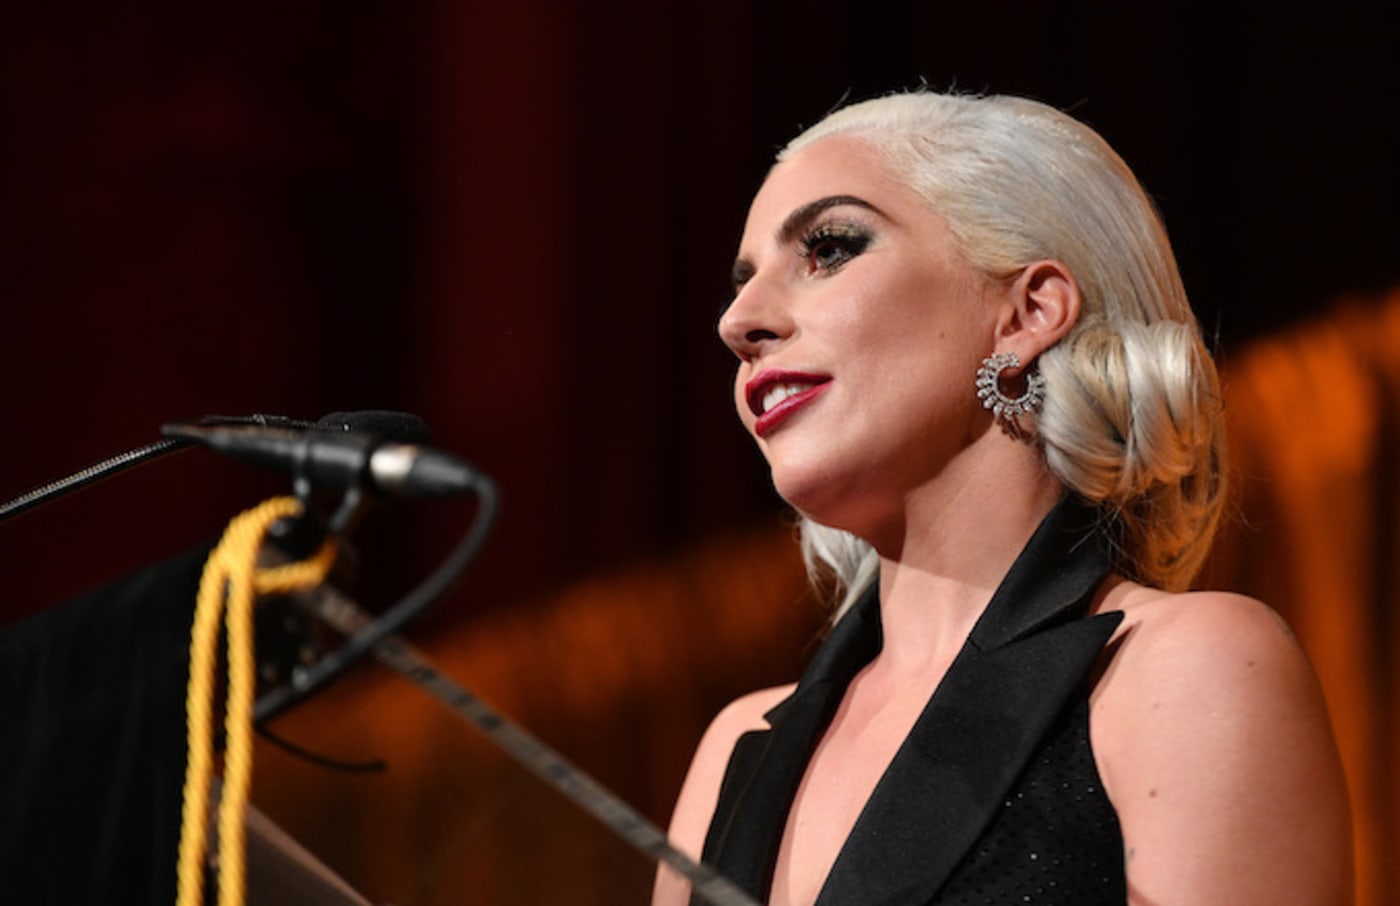 Lady Gaga accepts the Best Actress award for A Star Is Born.